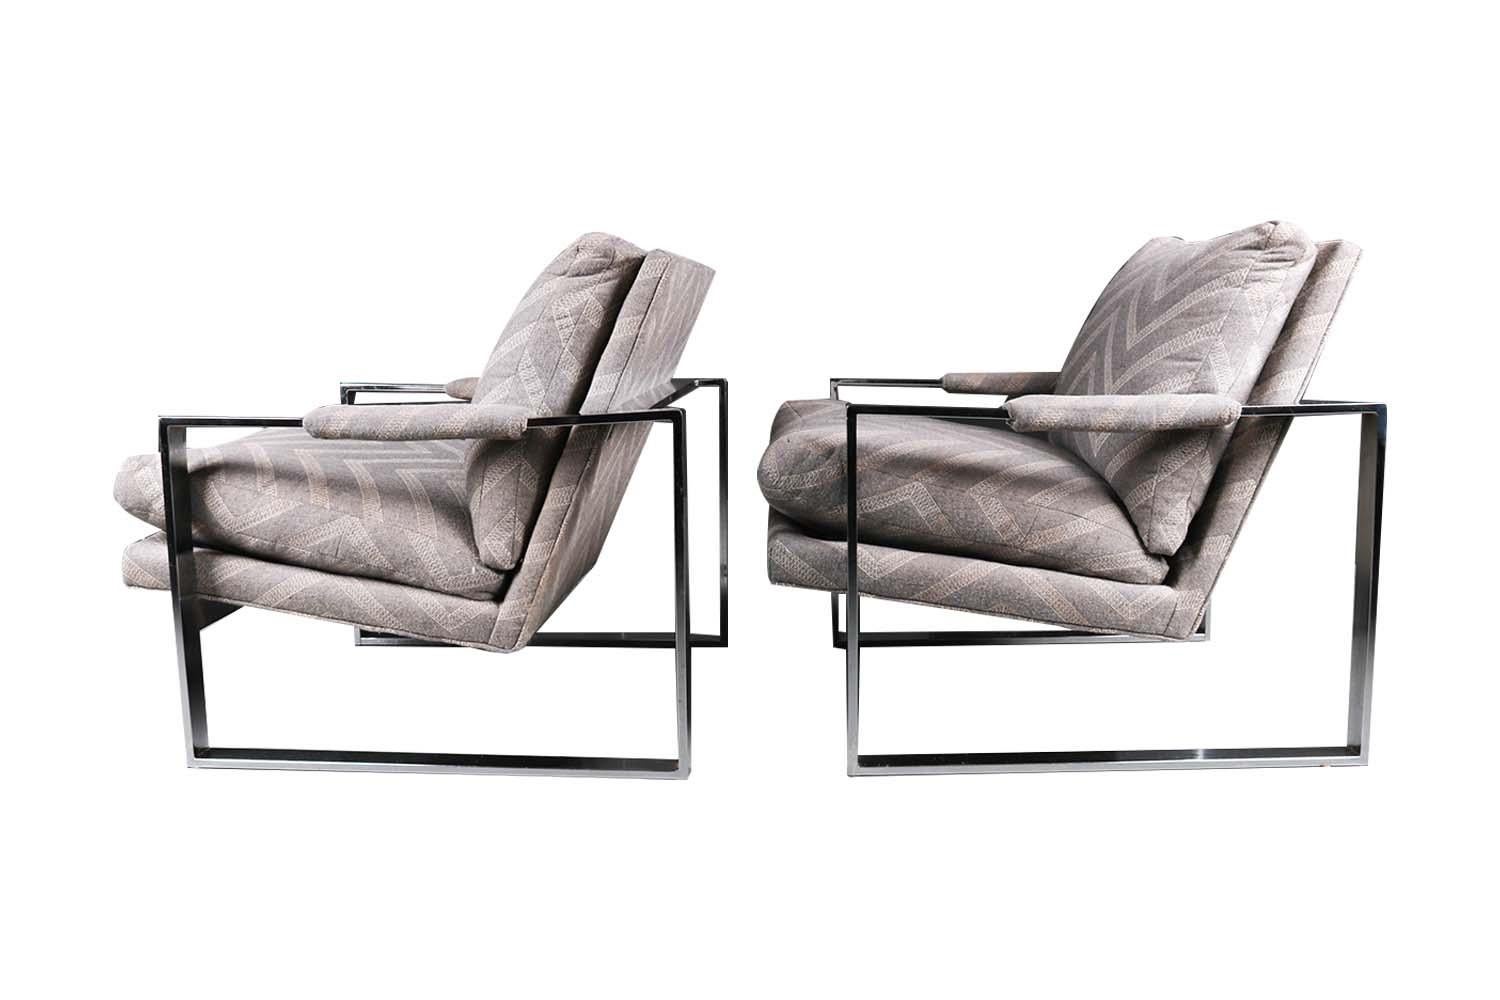 Upholstery Midcentury Chrome Lounge Chairs Milo Baughman Style Pair For Sale